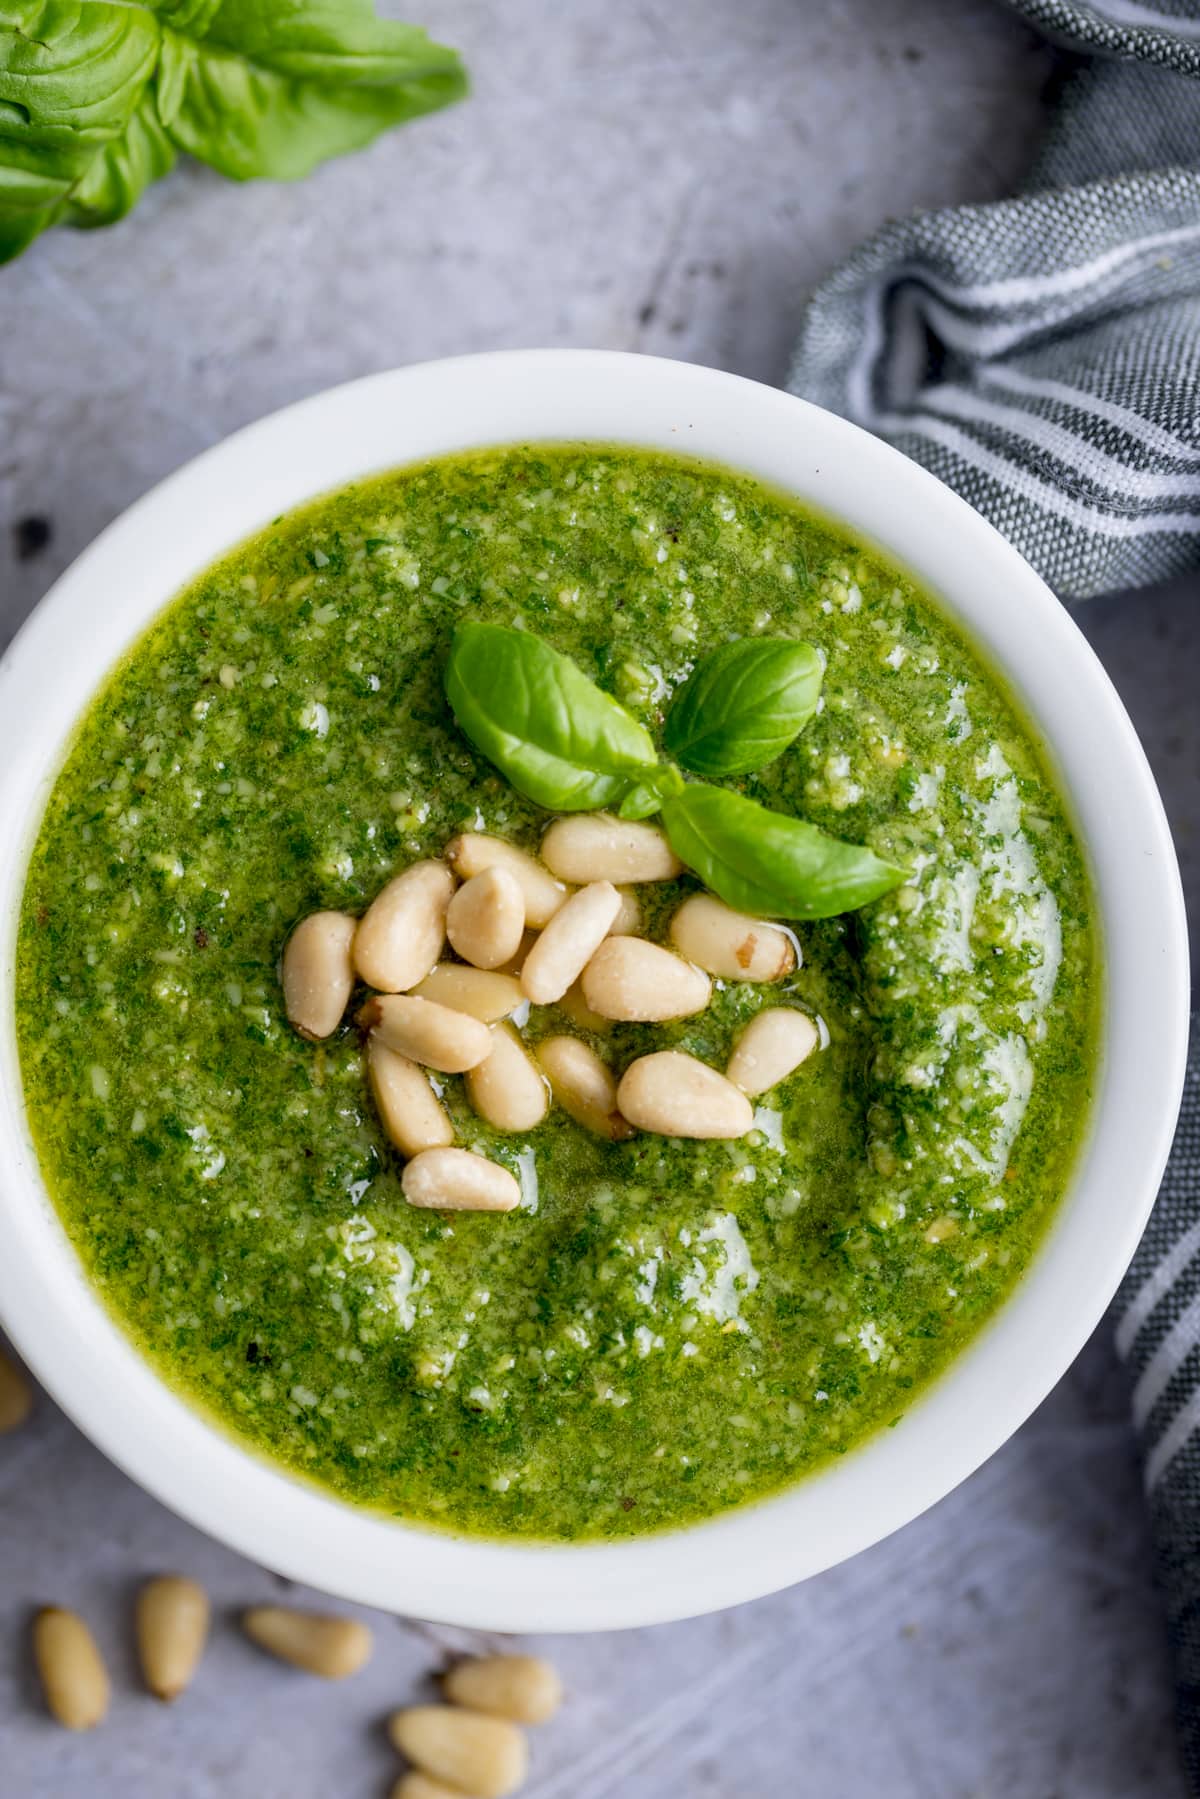 Pesto topped with pine nuts and basil in a small white bowl, surrounded by ingredients.